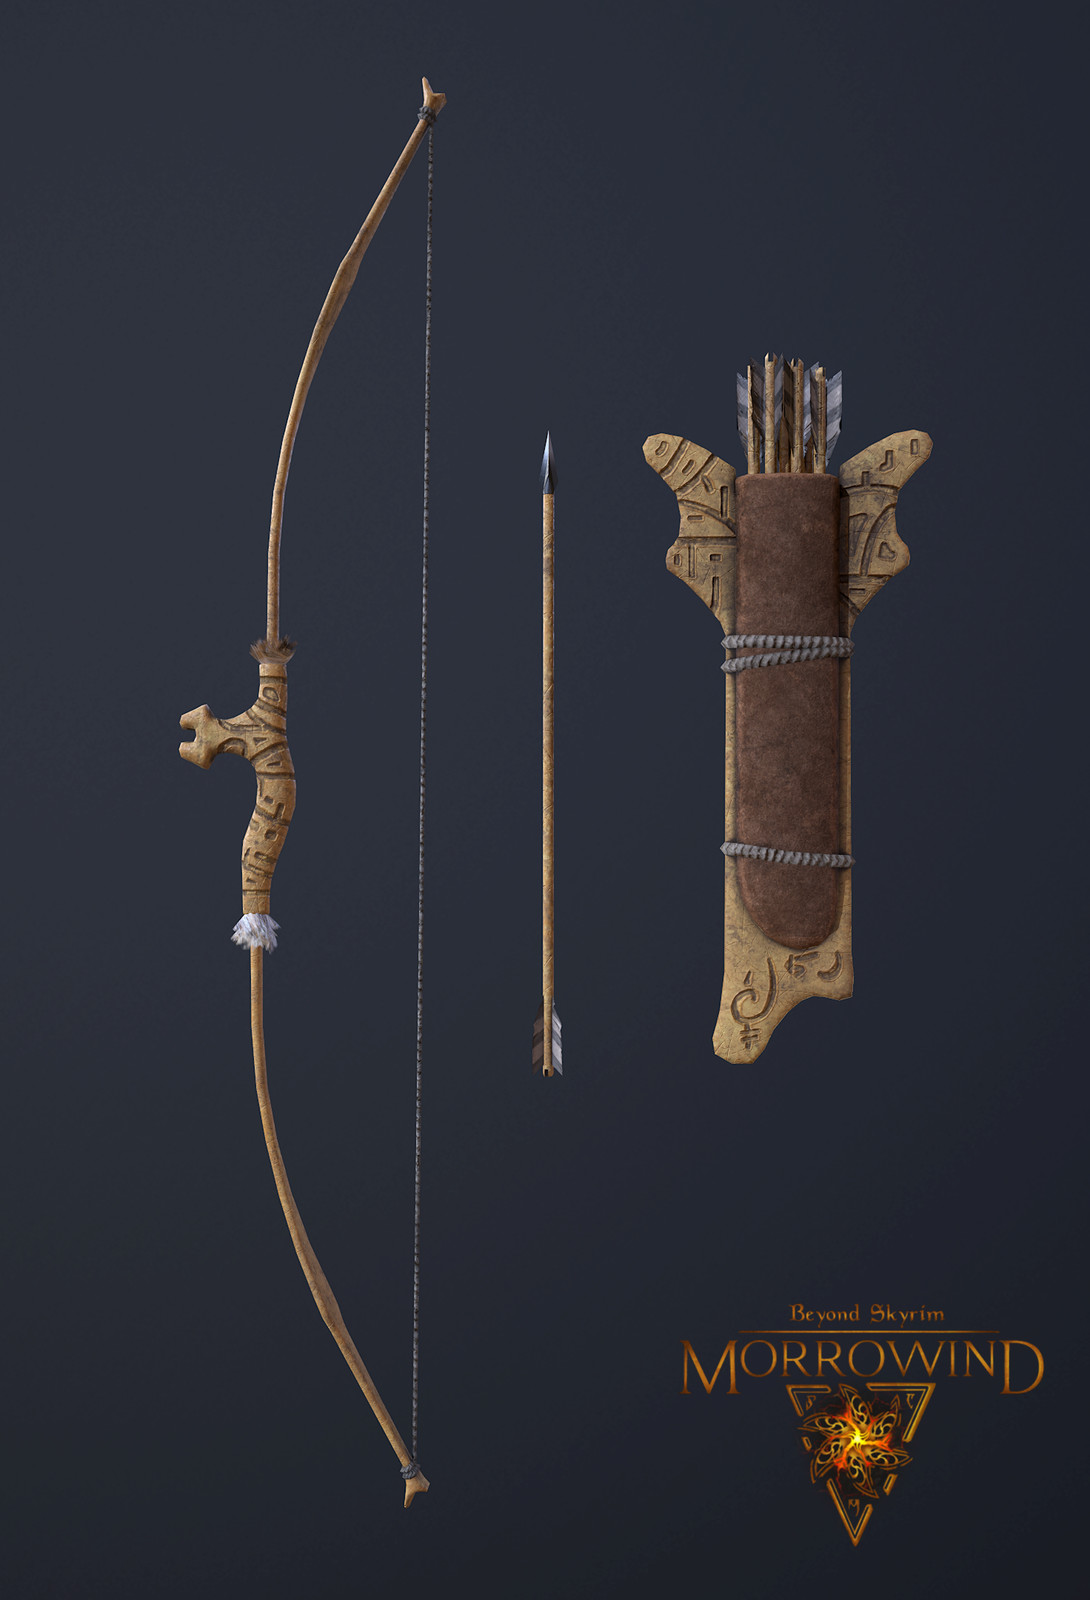 Bow, Arrow and Quiver